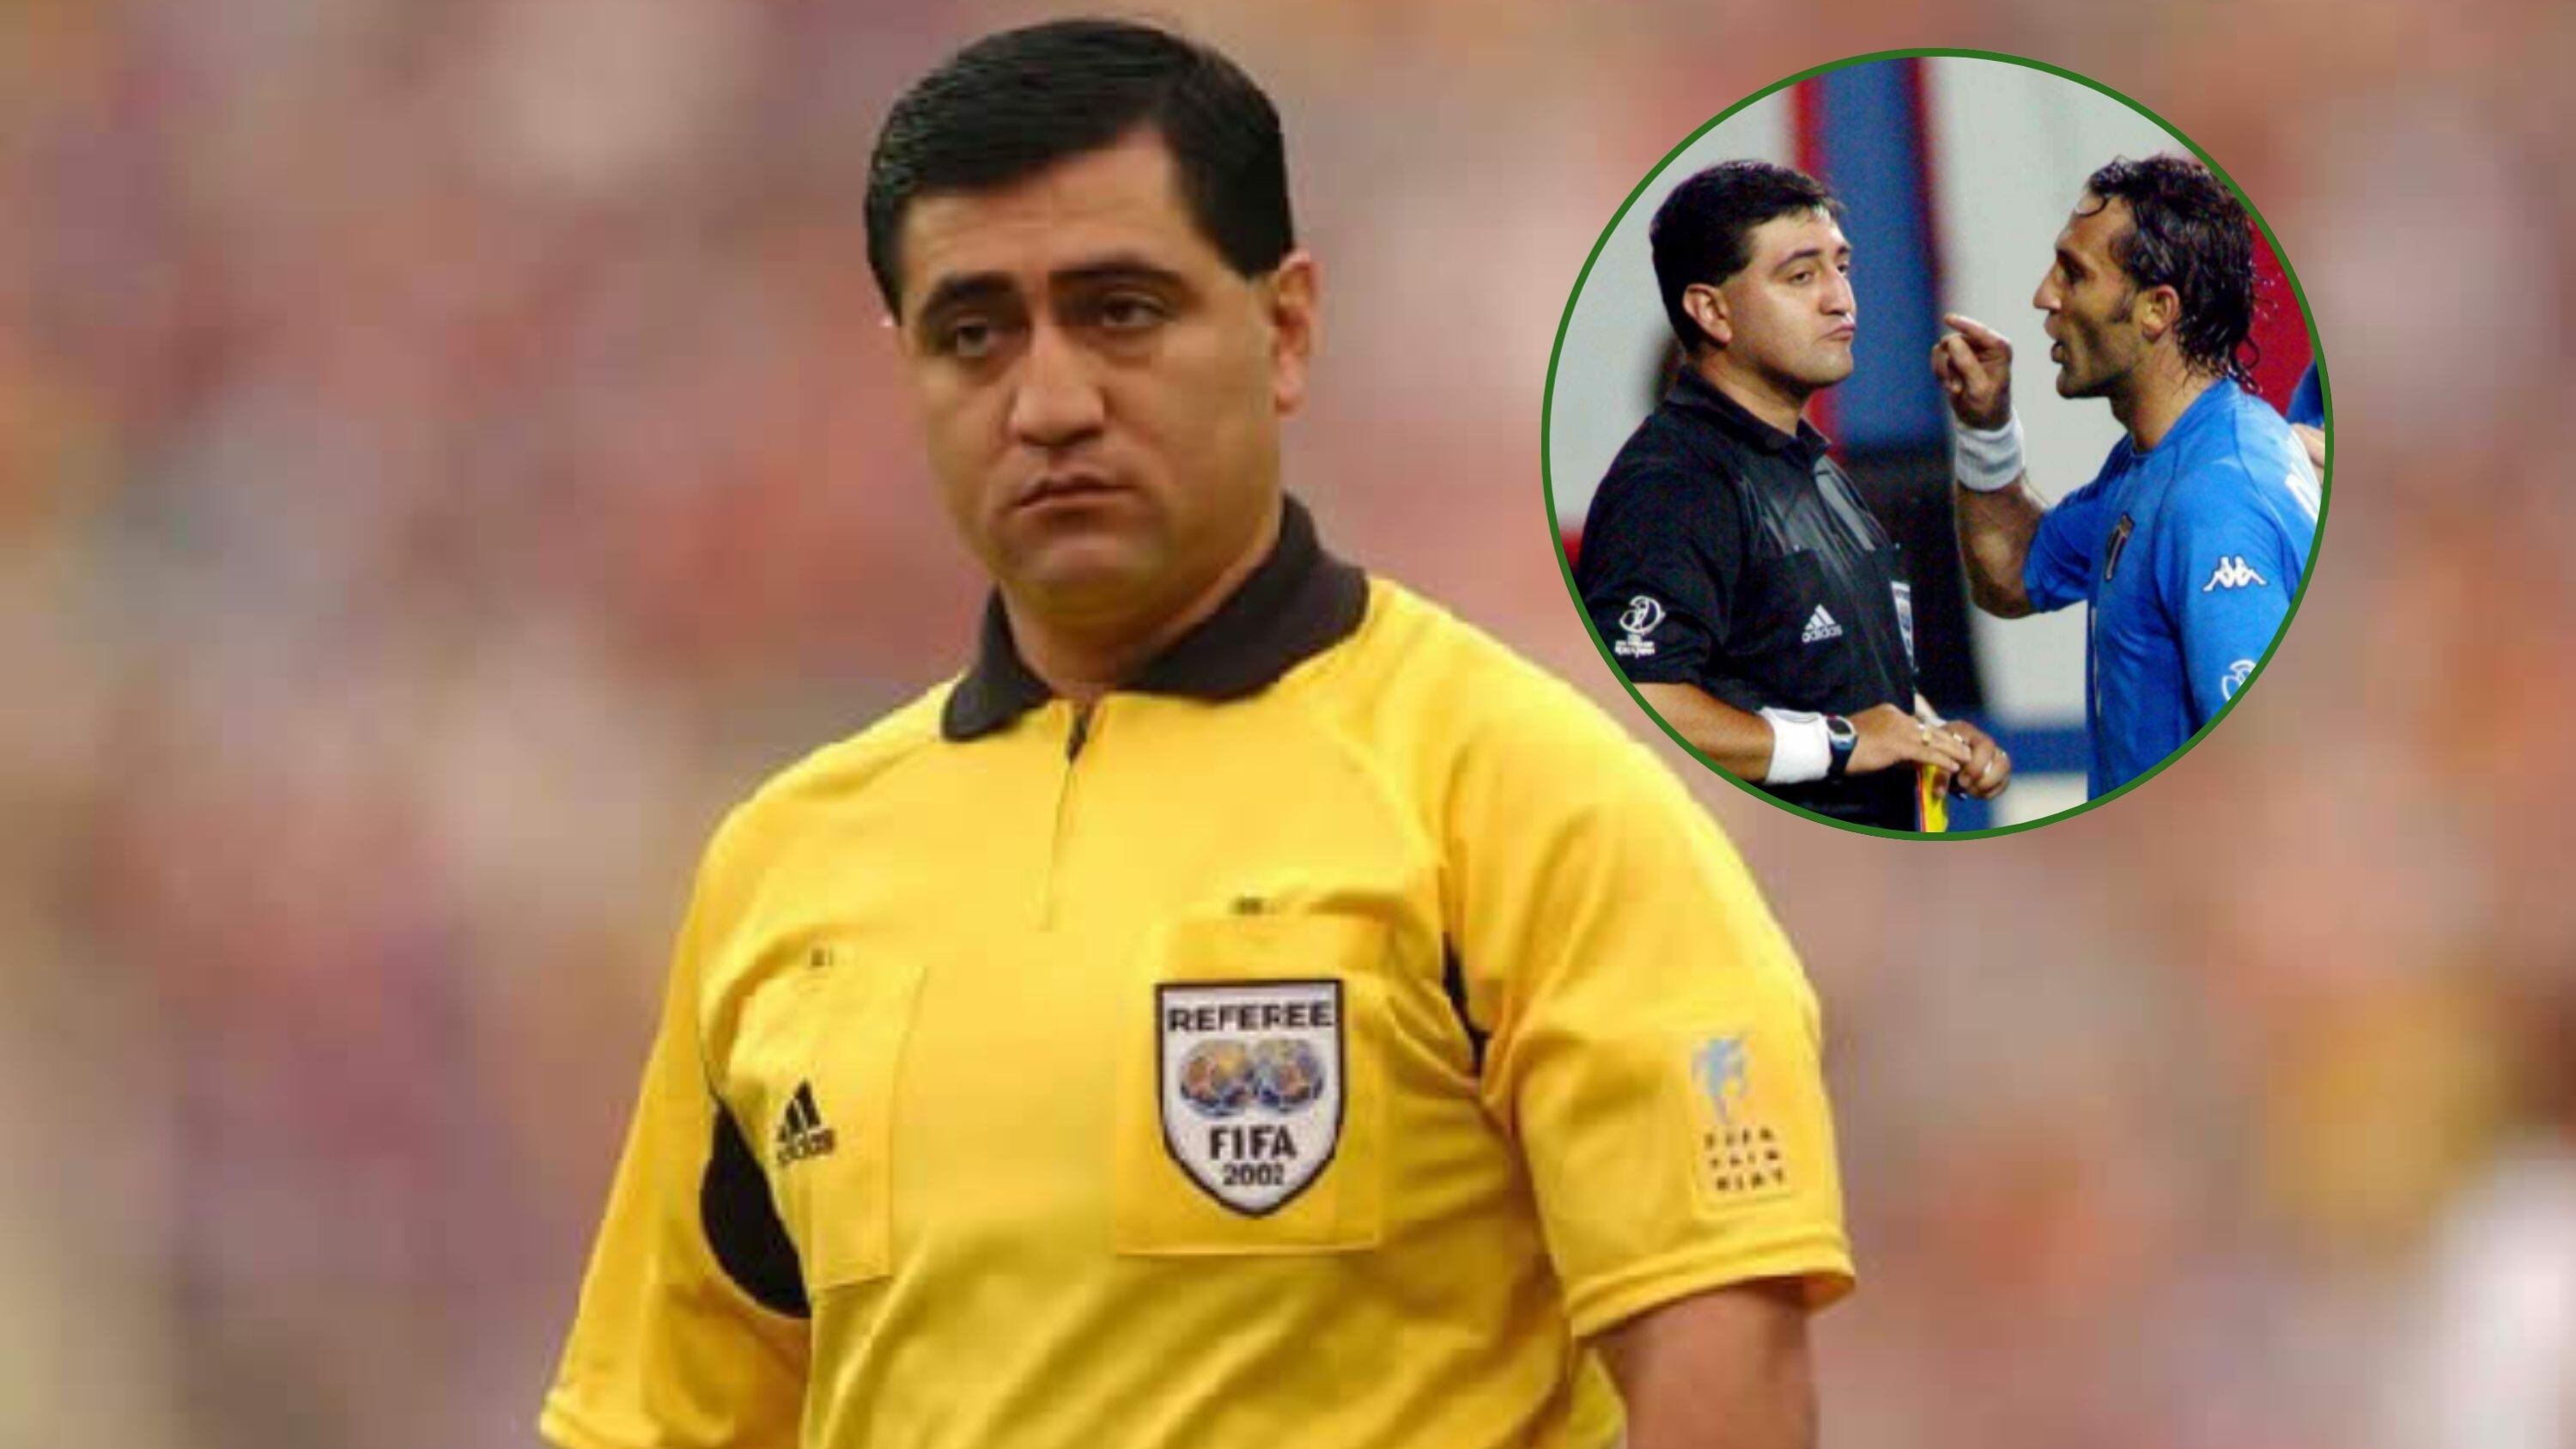 What happened with the referee Byron Moreno, who eliminated Italy against Korea in the 2002 World Cup?